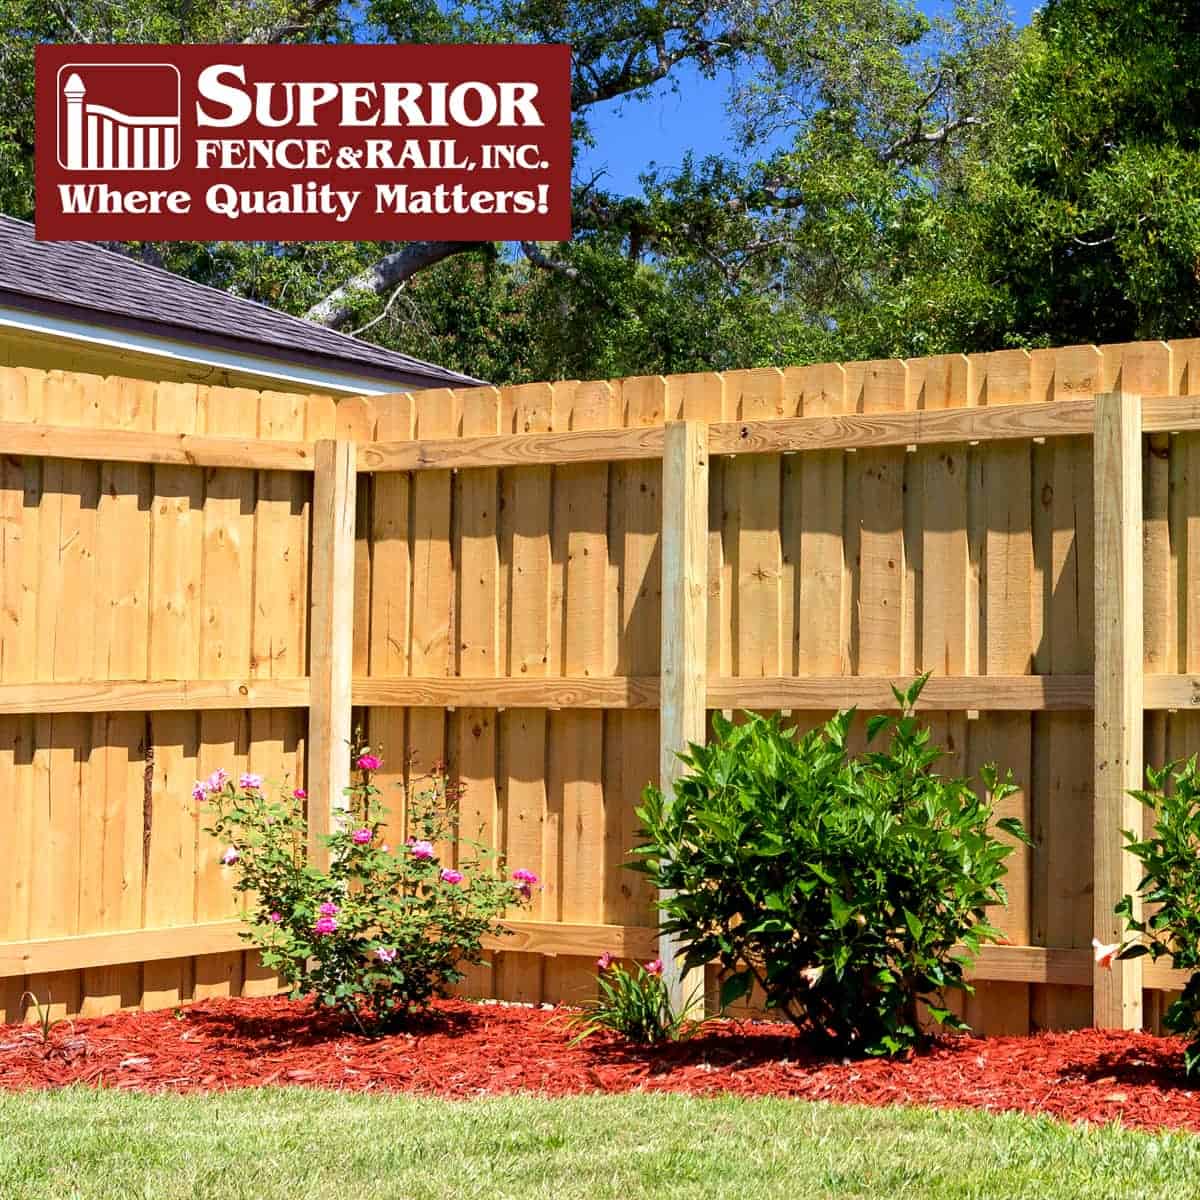 Antioch fence company contractor